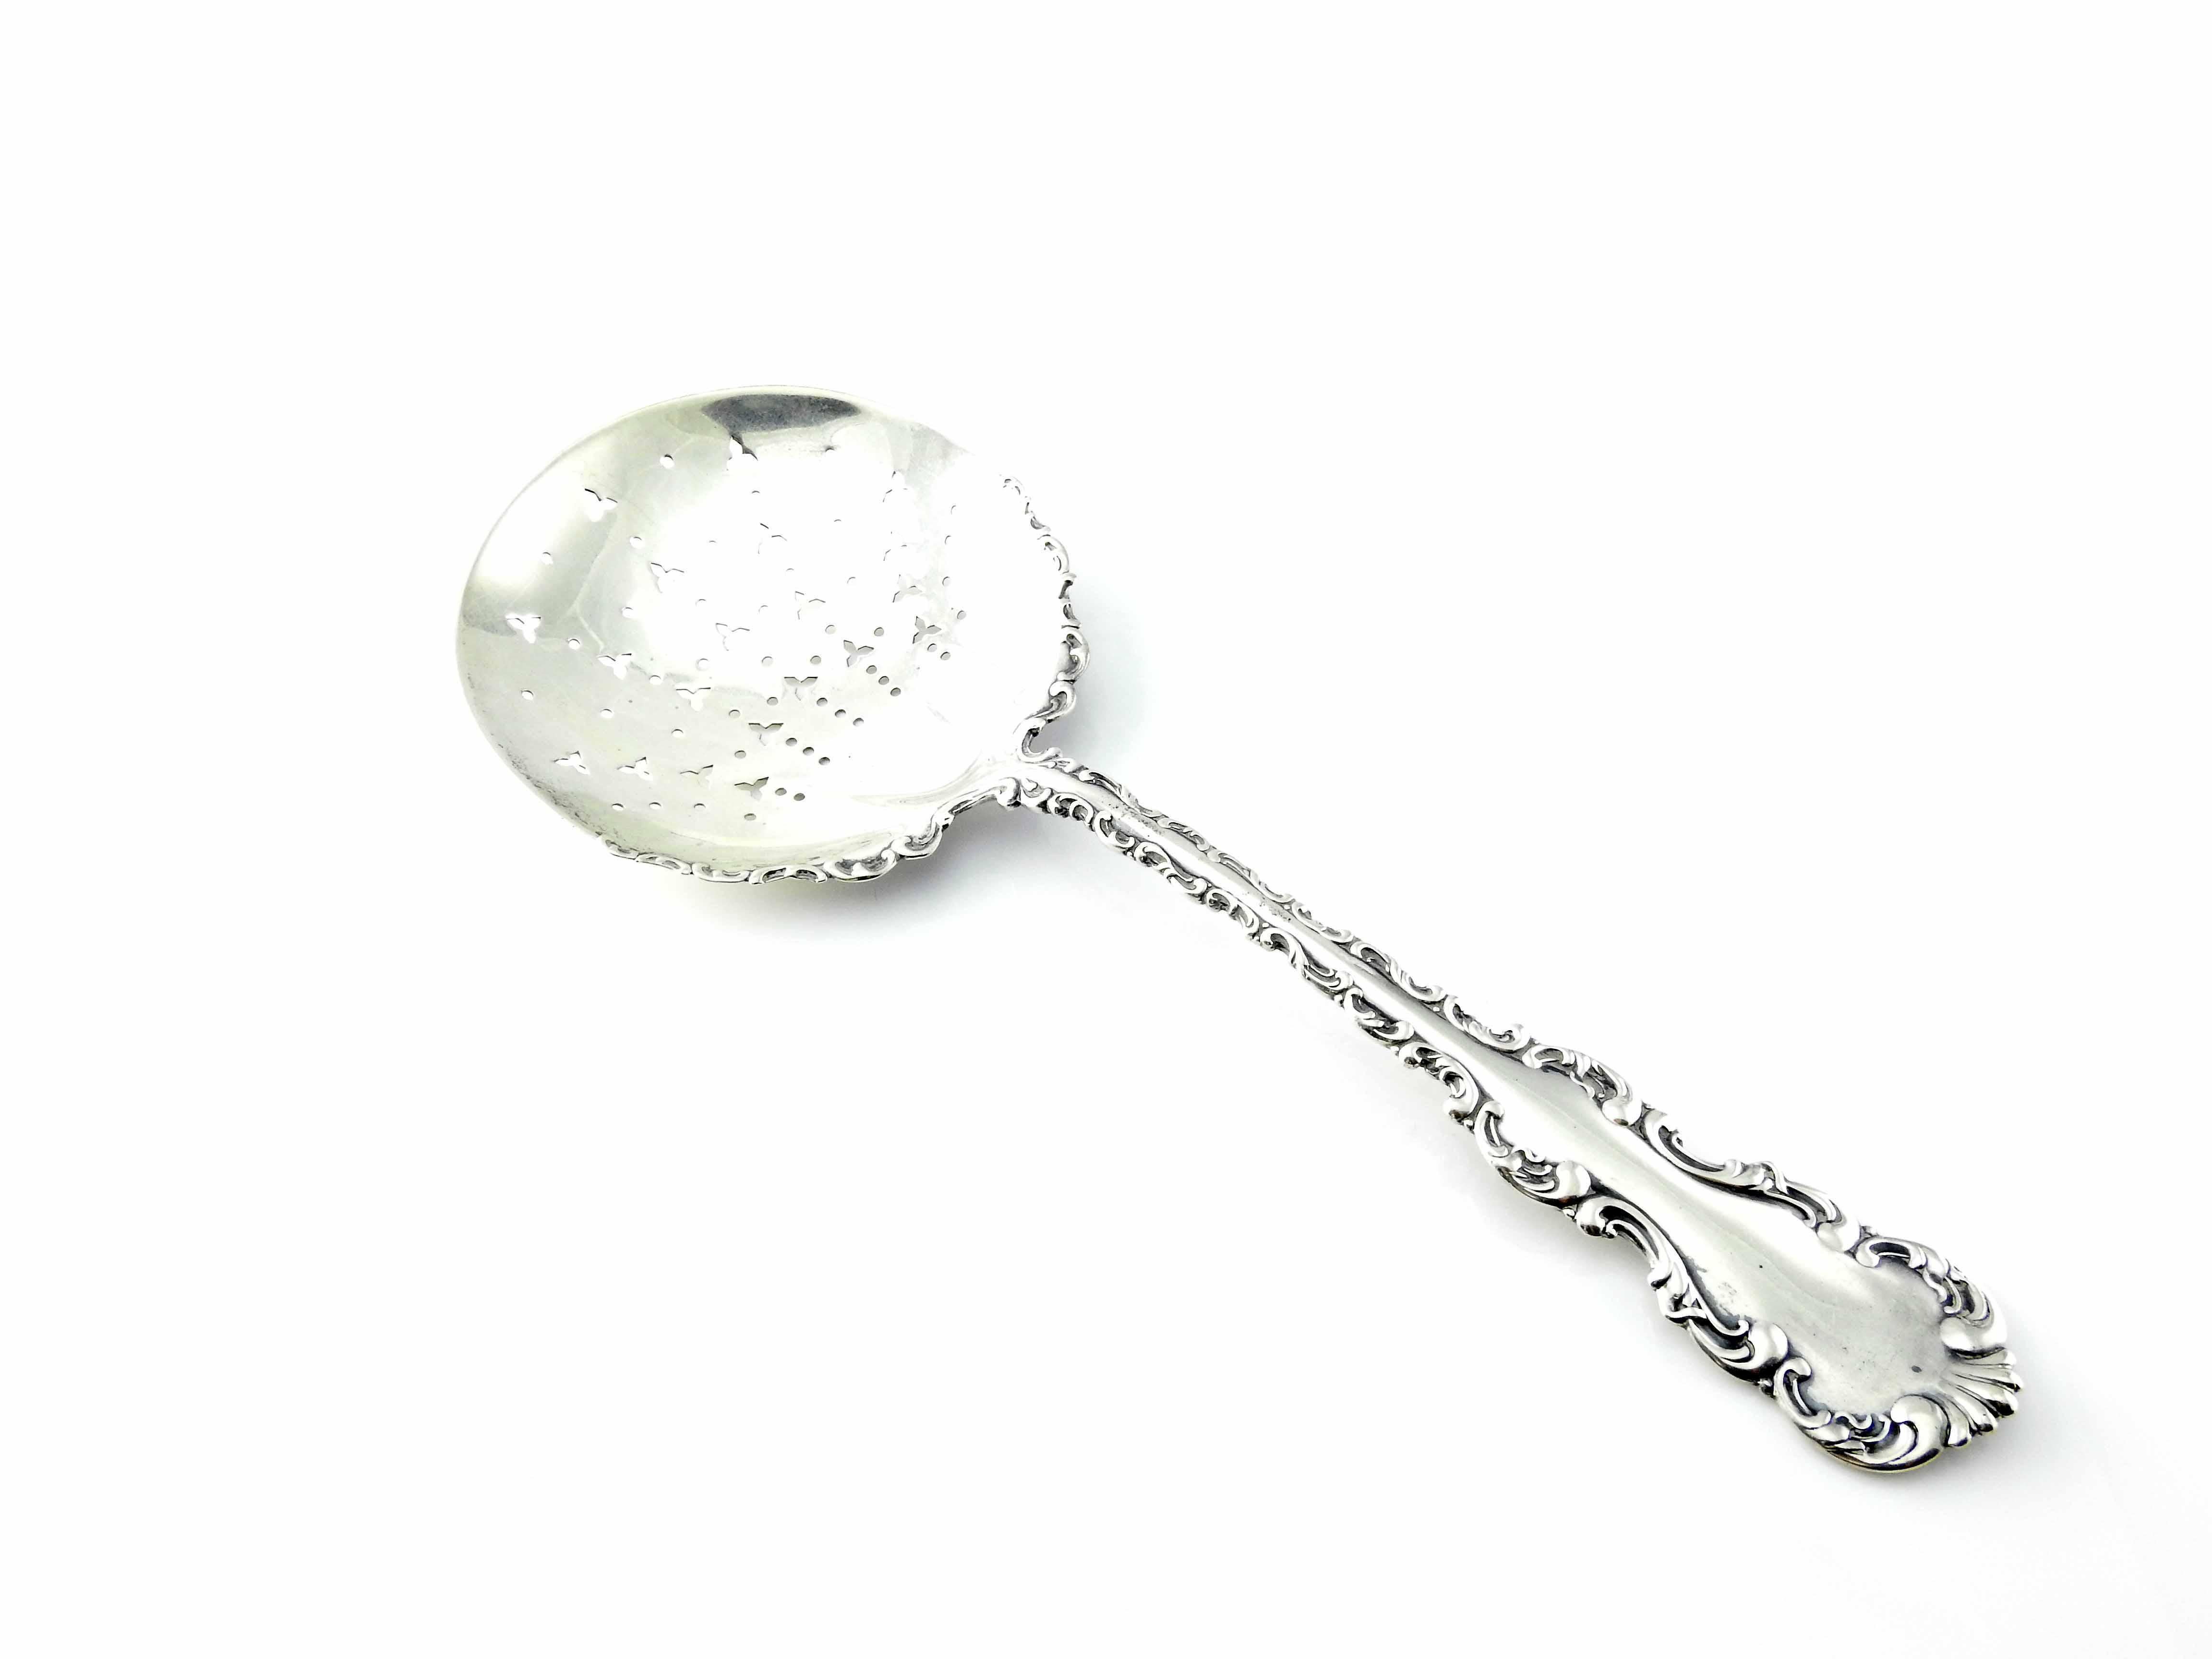 Antique sterling silver pierced pea serving spoon by Whiting Manufacturing Co in the Louis XV pattern.

Beautiful piece from 1891 in the Whiting Manufacturing Co of NY, NY. No monogram.

Measures 8 5/8